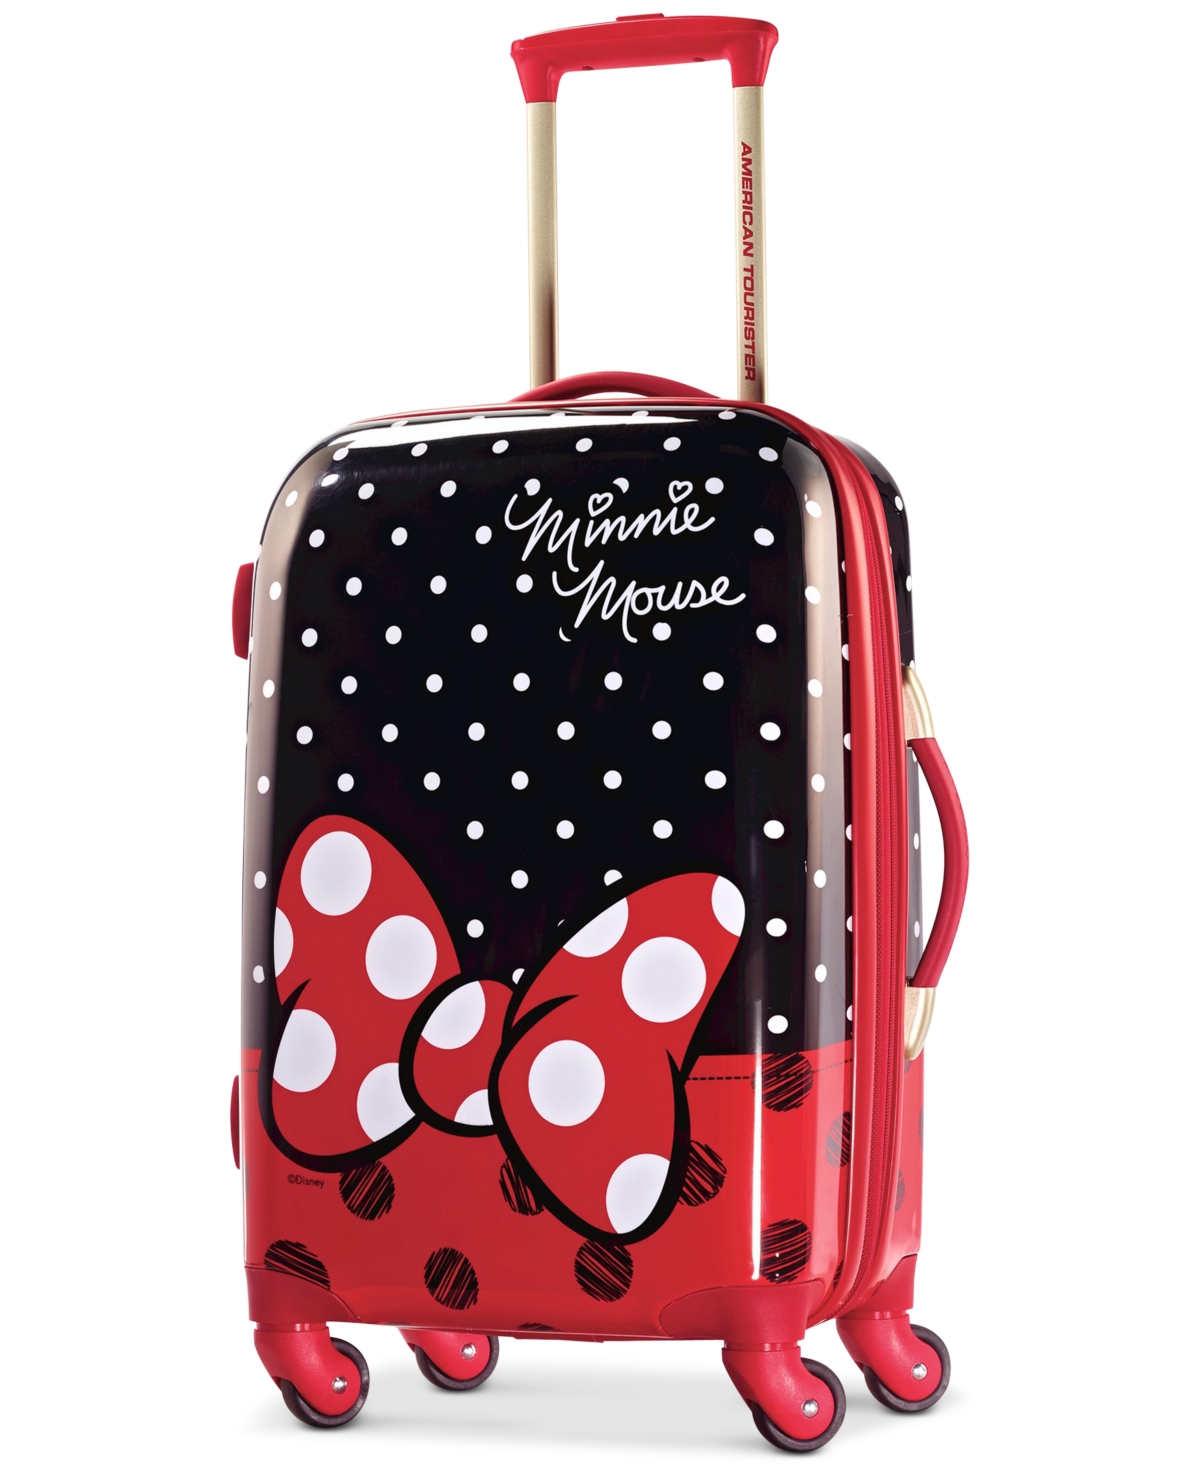 American Tourister Disney Minnie Mouse Red Bow 21" Hardside Spinner Suitcase - Minnie Mouse Red Bow Print